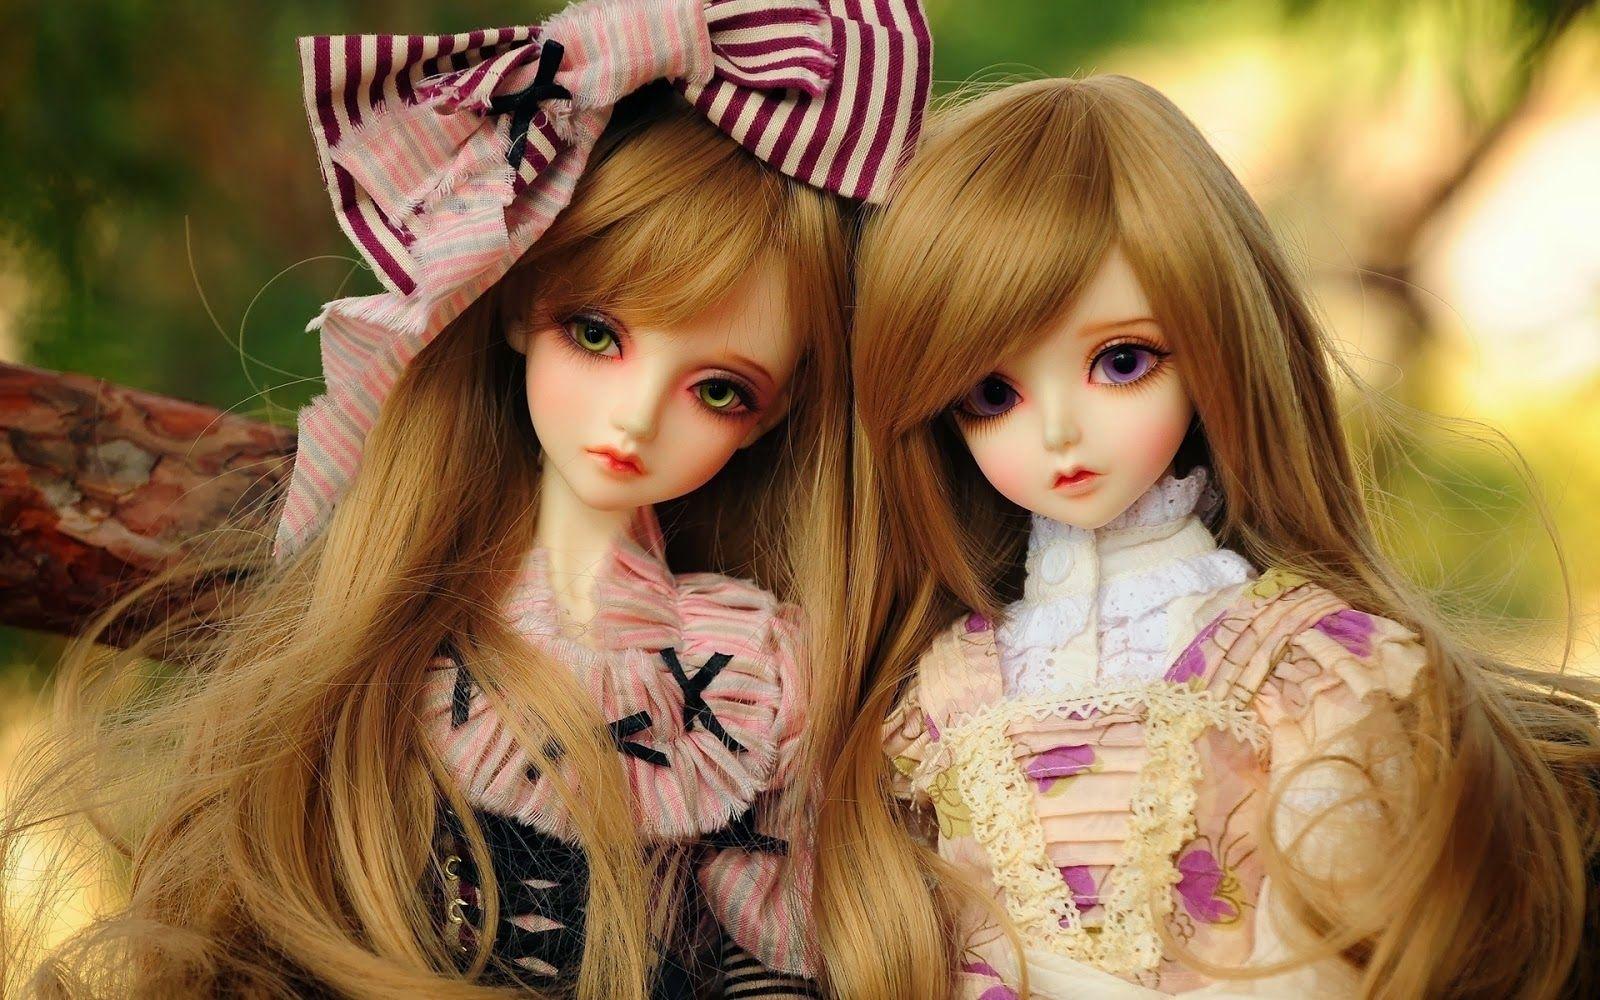 Cute Dolls Picture For Facebook. Cute Dolls Wallpaper